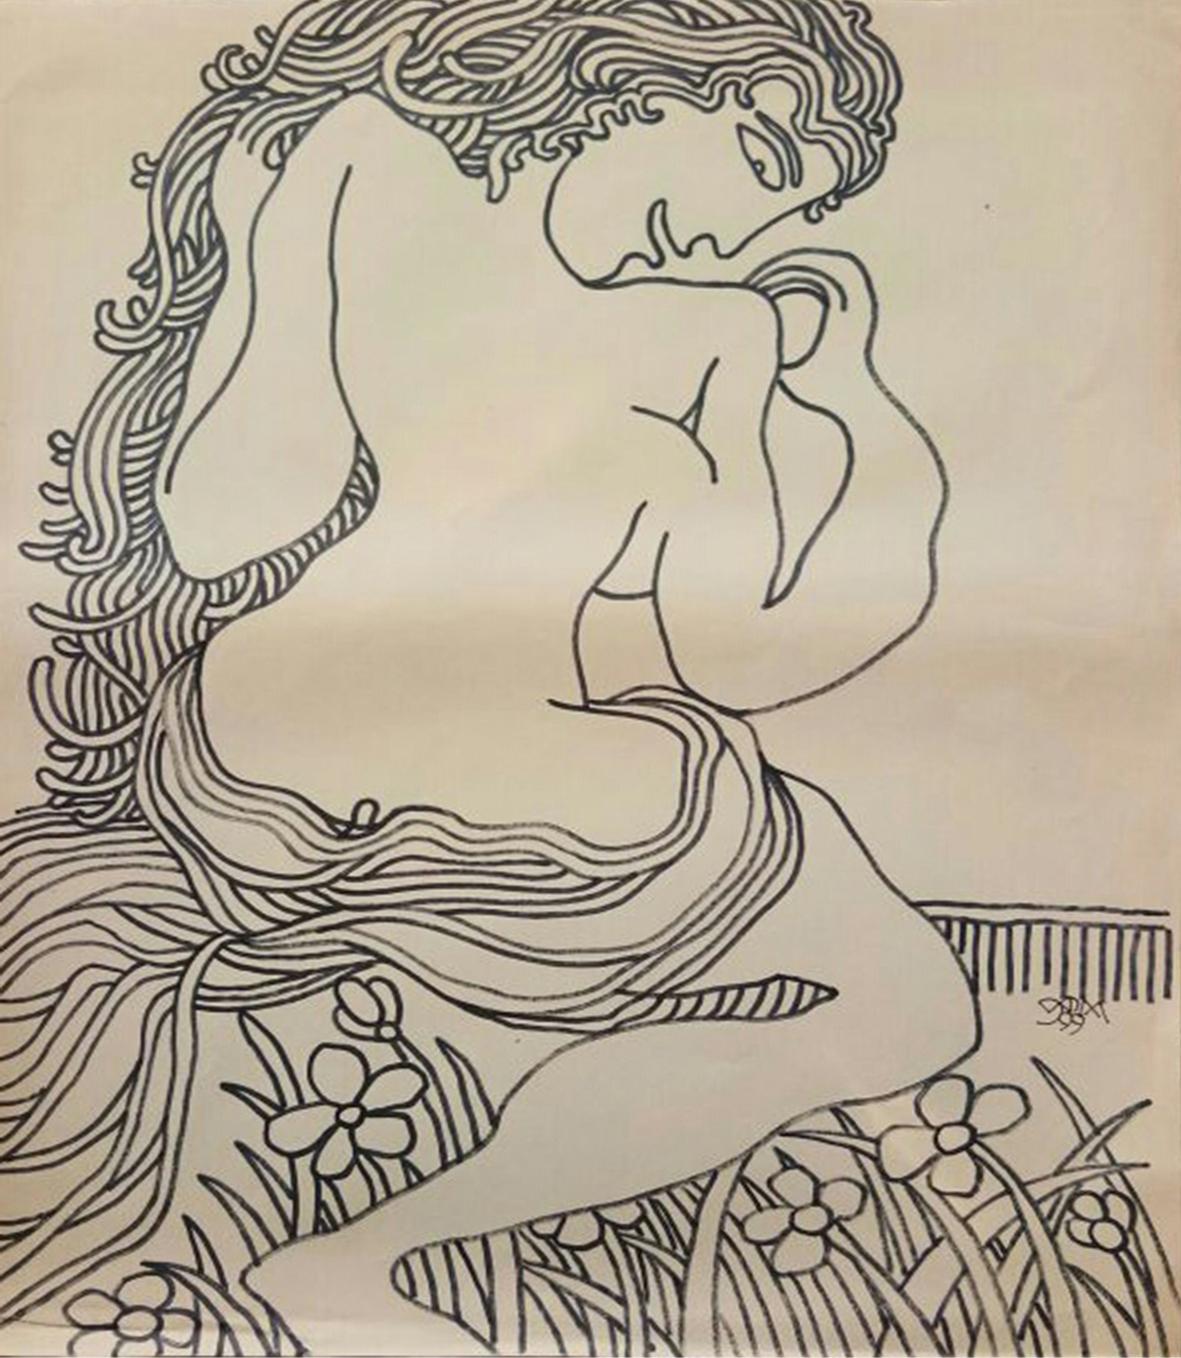 Prakash Karmakar - Untitled - 23 X 20 inches (unframed size)
Ink on Paper


Style : Legendary master artist Lt. Prokash Karmakar from Bengal was solely responsible for the Bengal Movement of Art. His father Lt. Prahalad Karmakar was a very famous